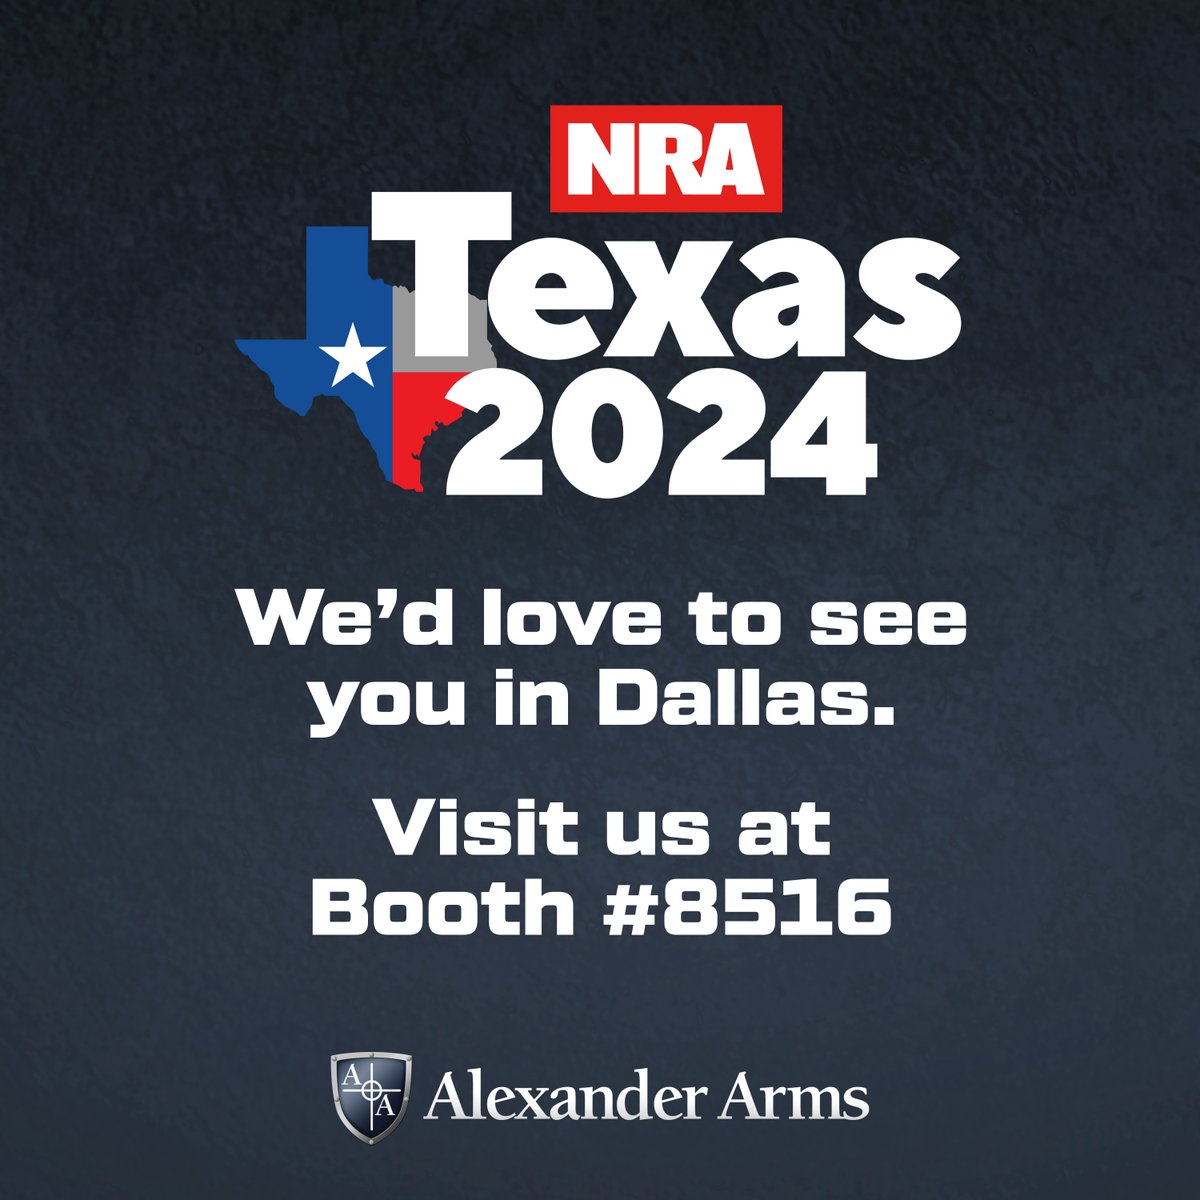 Come see us at the annual NRA meetings and exhibits May 16-19th in Dallas, Texas. Stop by booth #8516 and say hello.